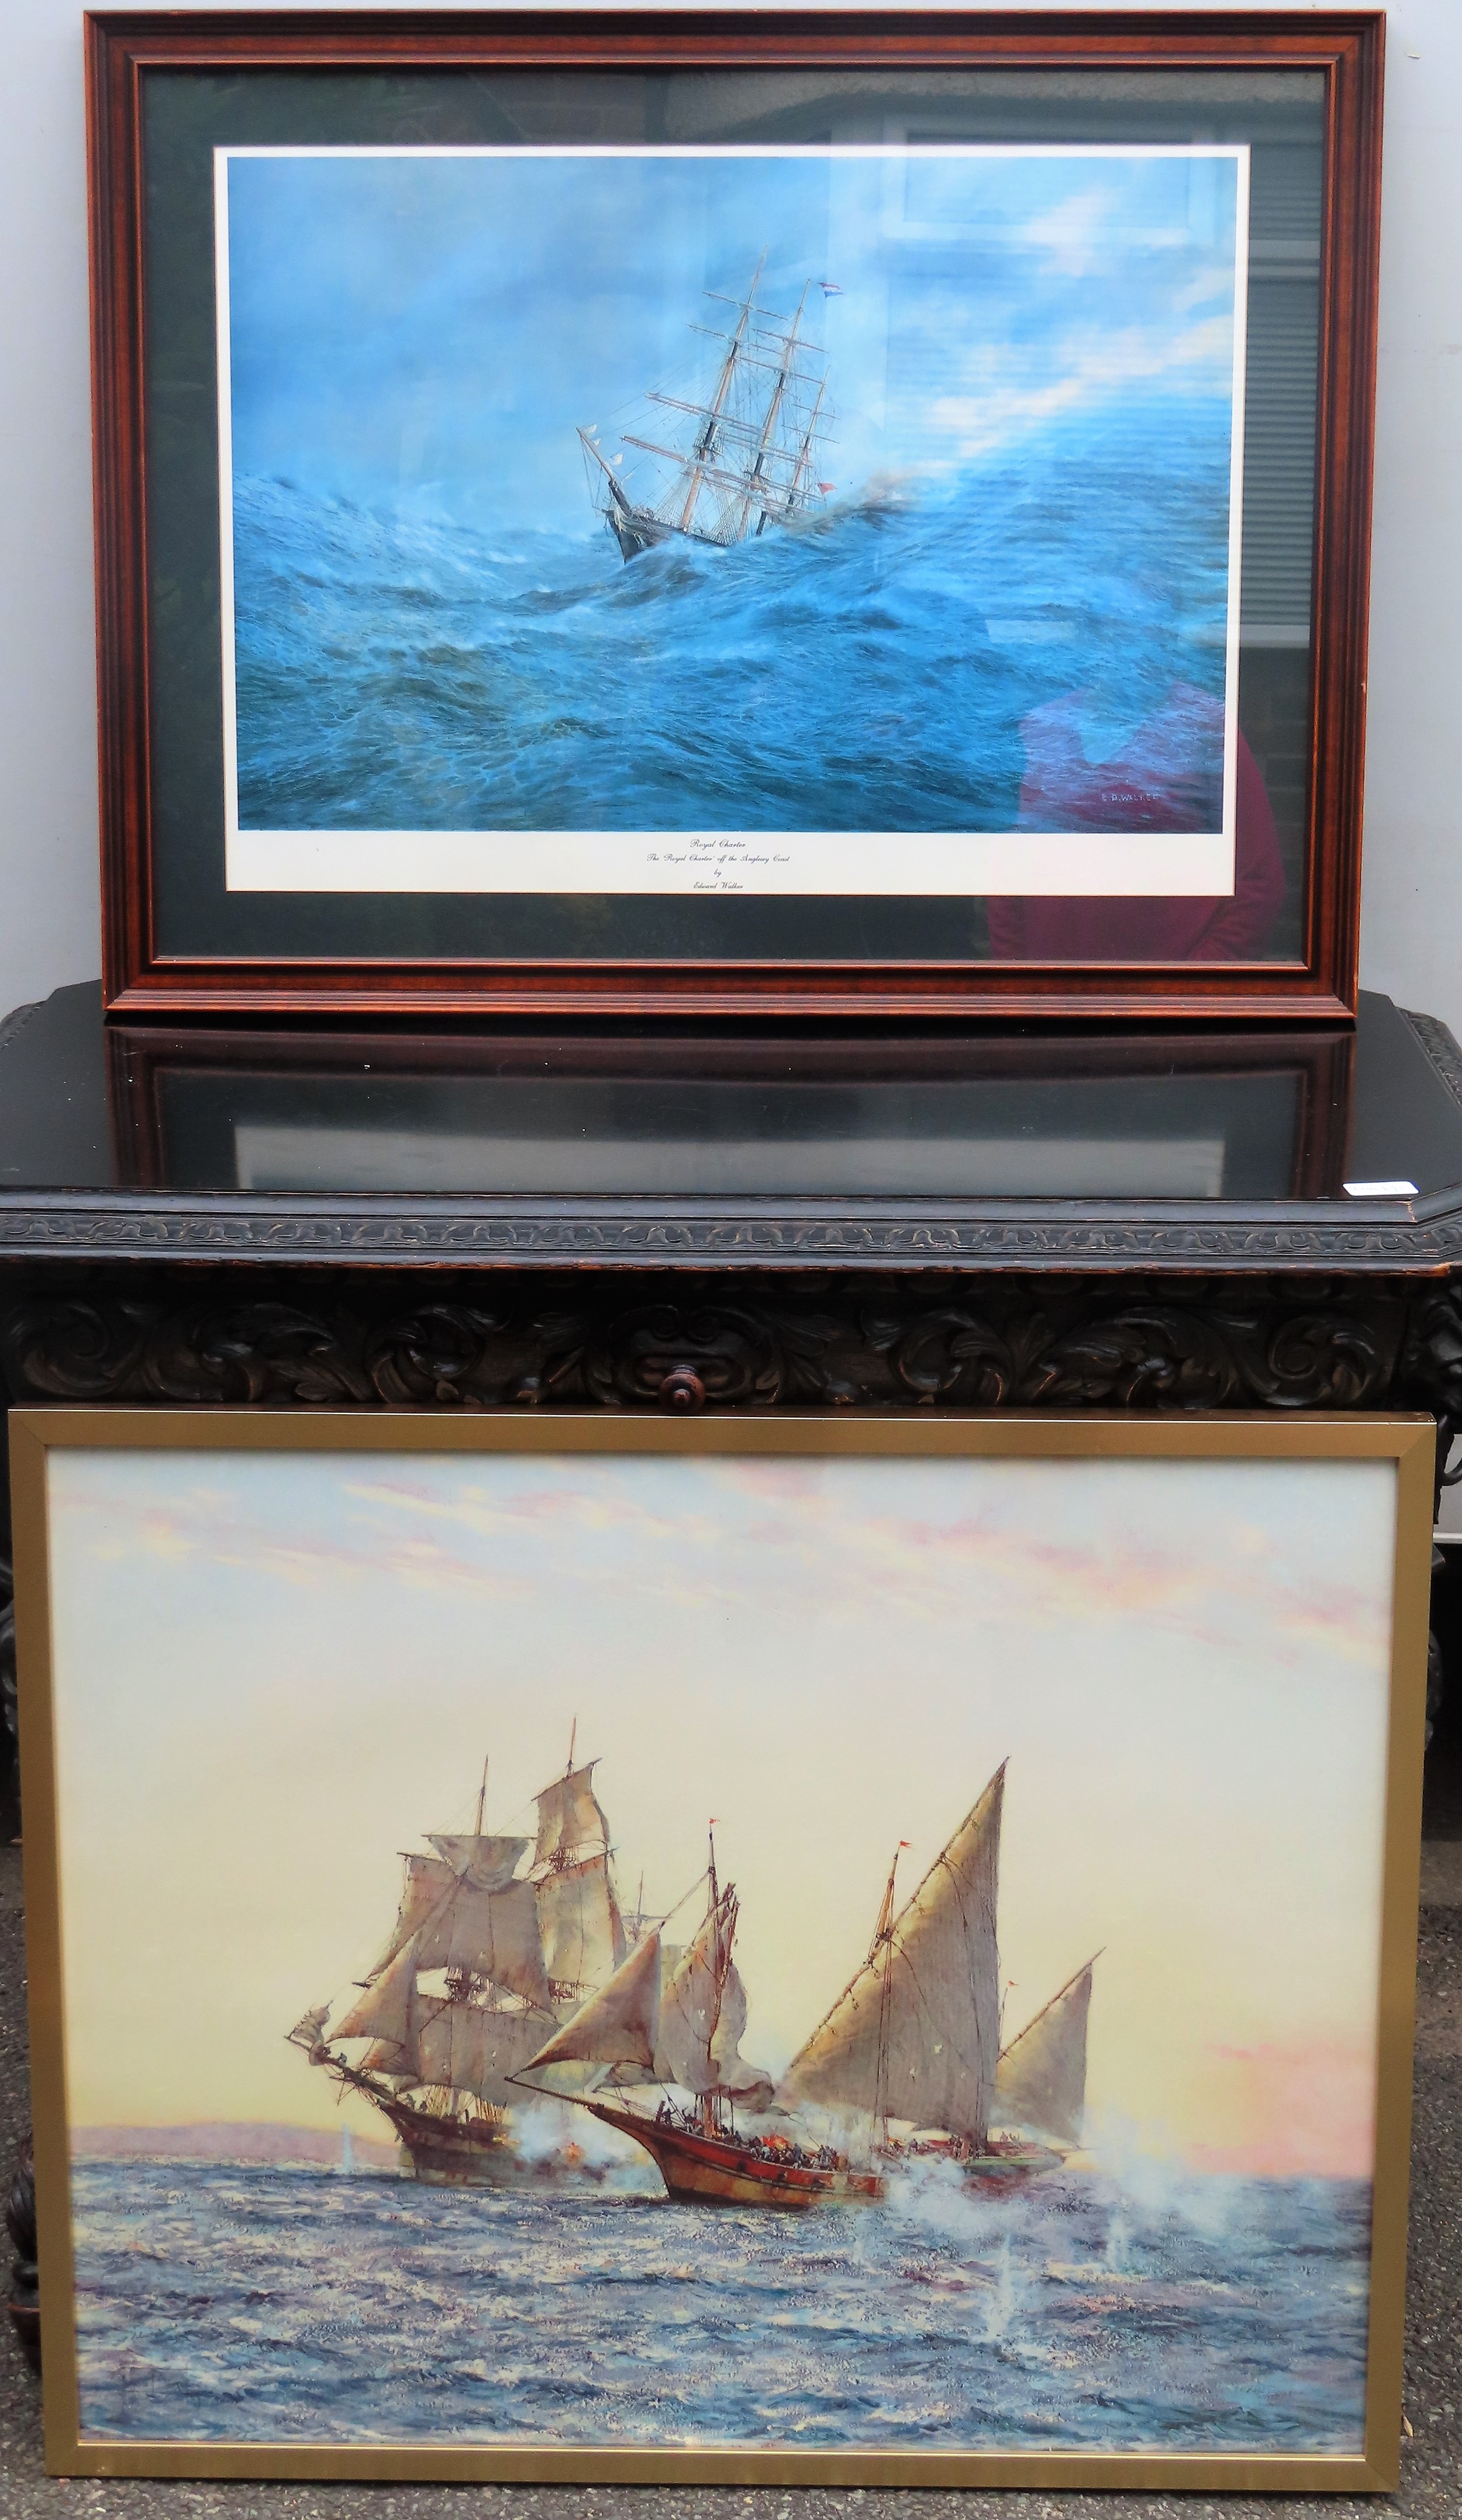 Two framed polychrome prints Both appear in reasonable used condition